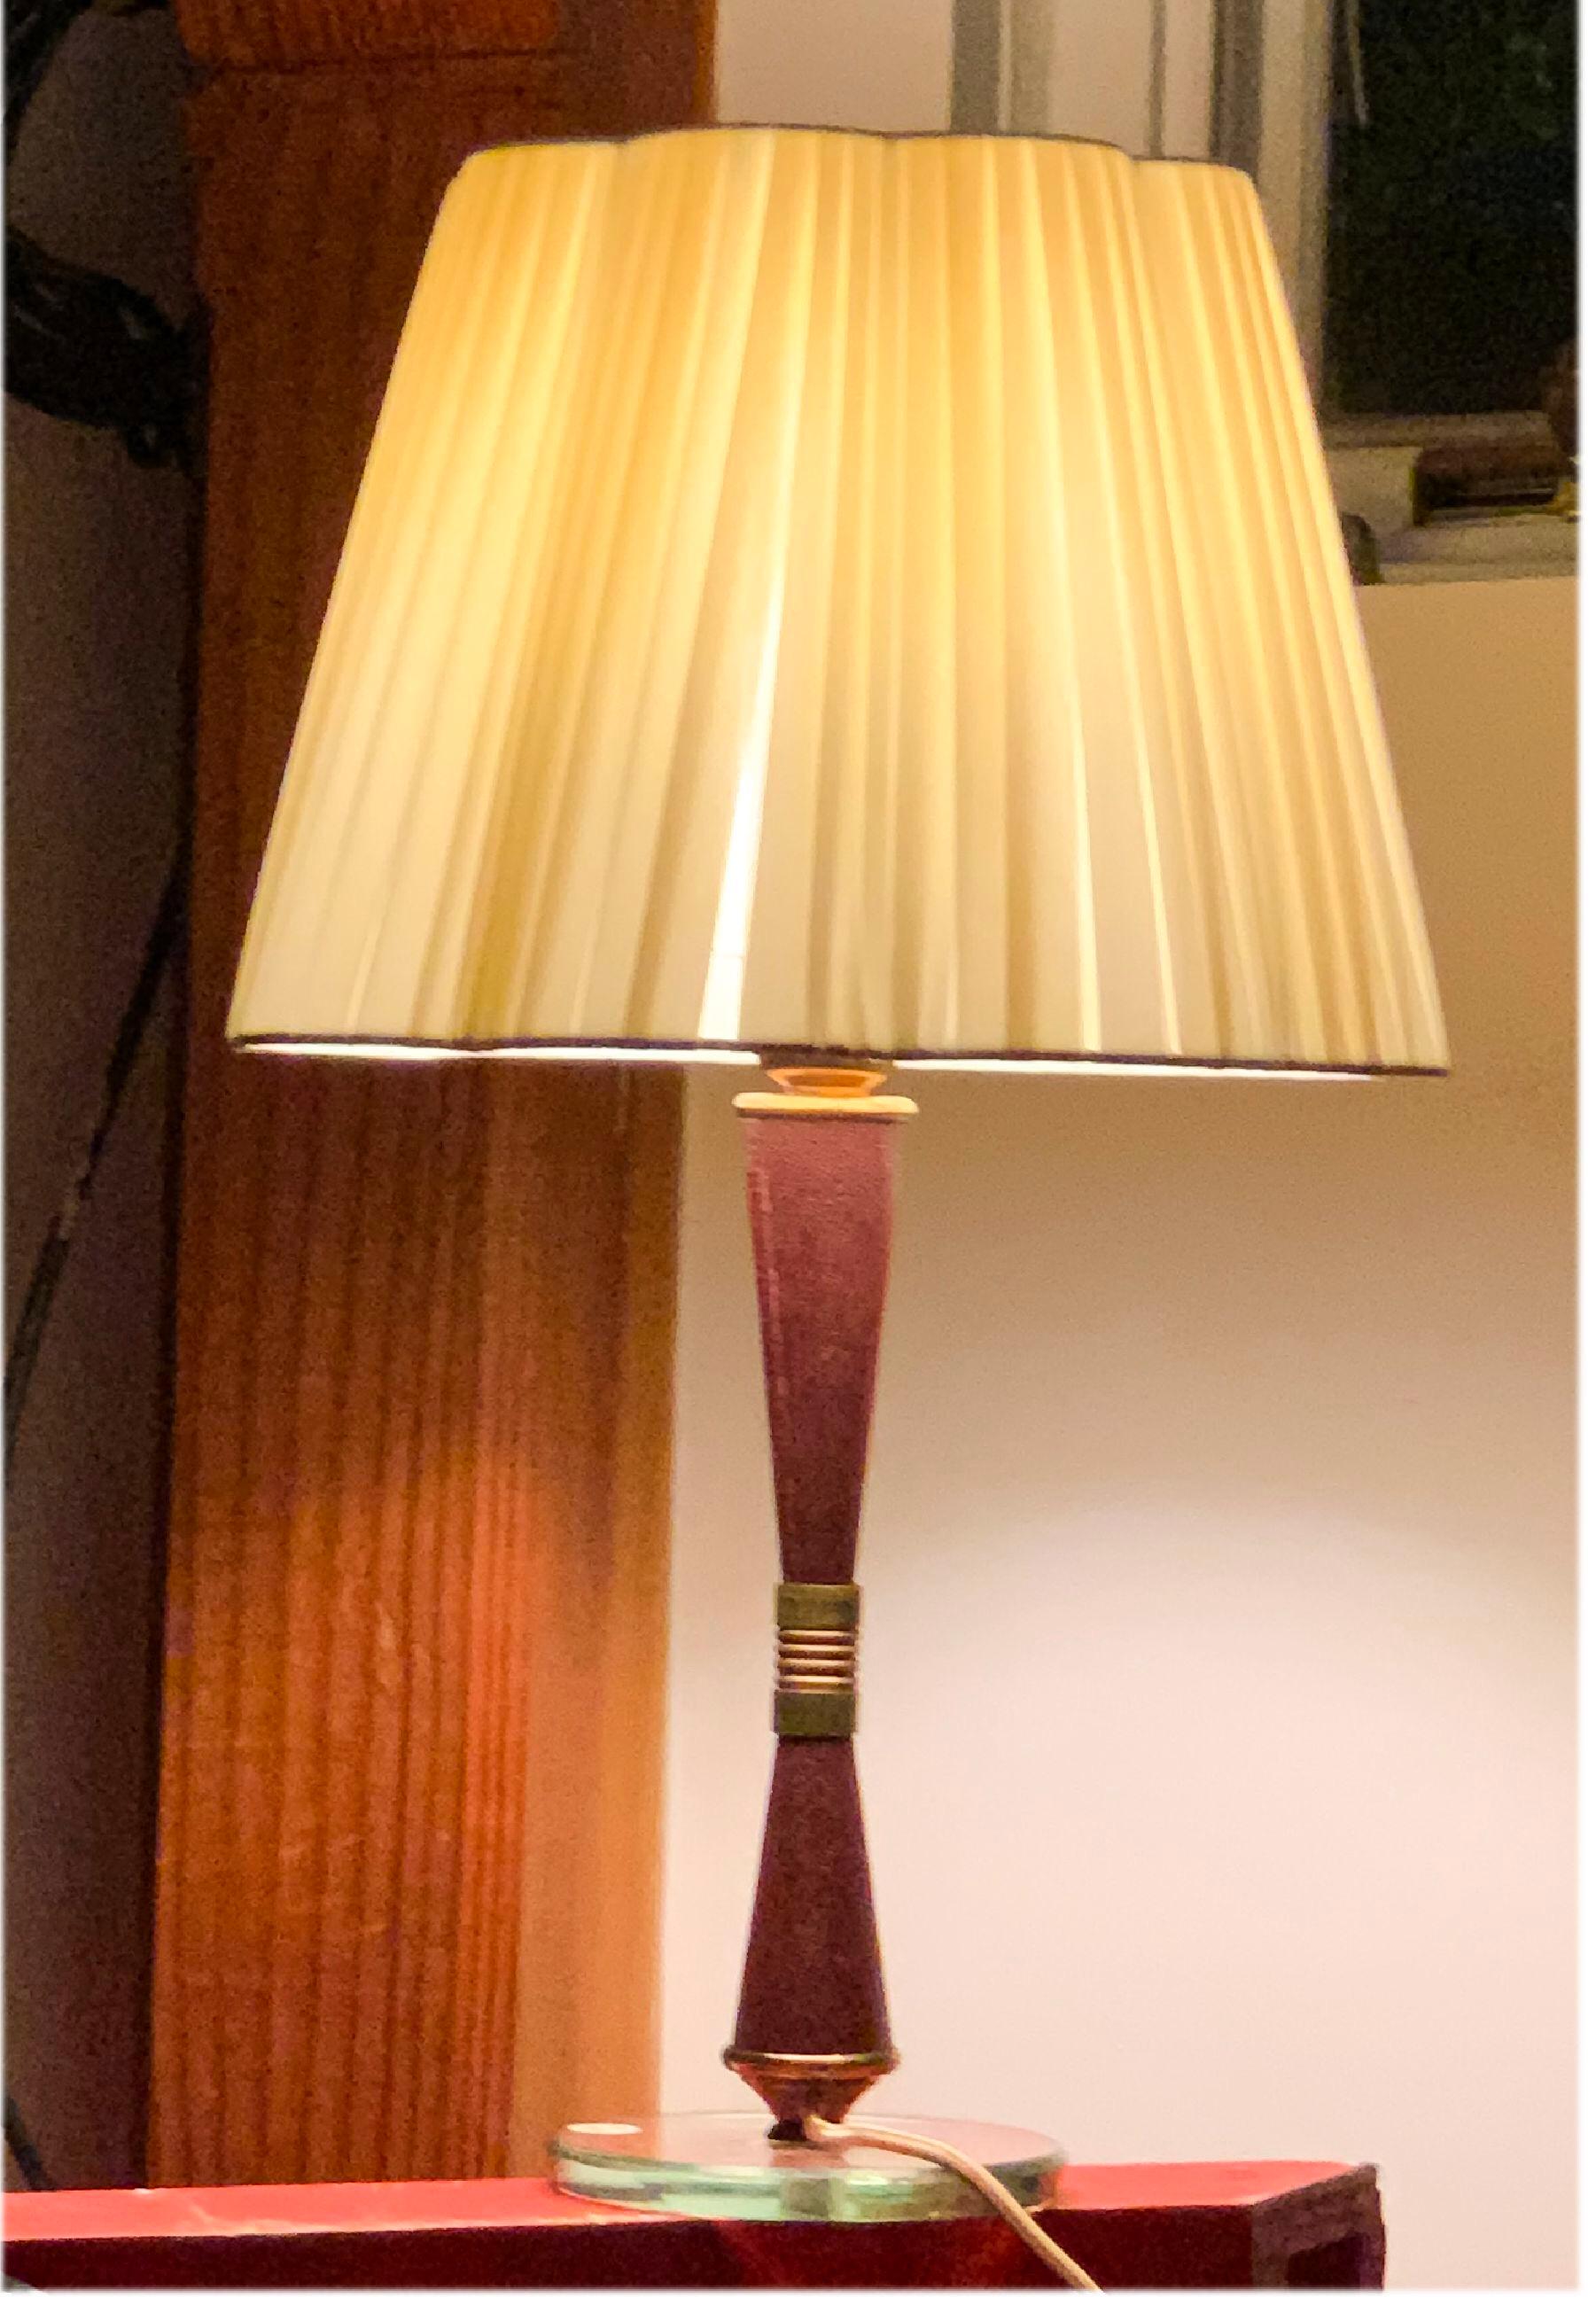 Midcentury Fontana Arte corseted leather, brass and glass table lamp, scalloped silk shade with pleats. Original wiring works. Lovely proportions. Restrained organicism. Italian modern at its finest.